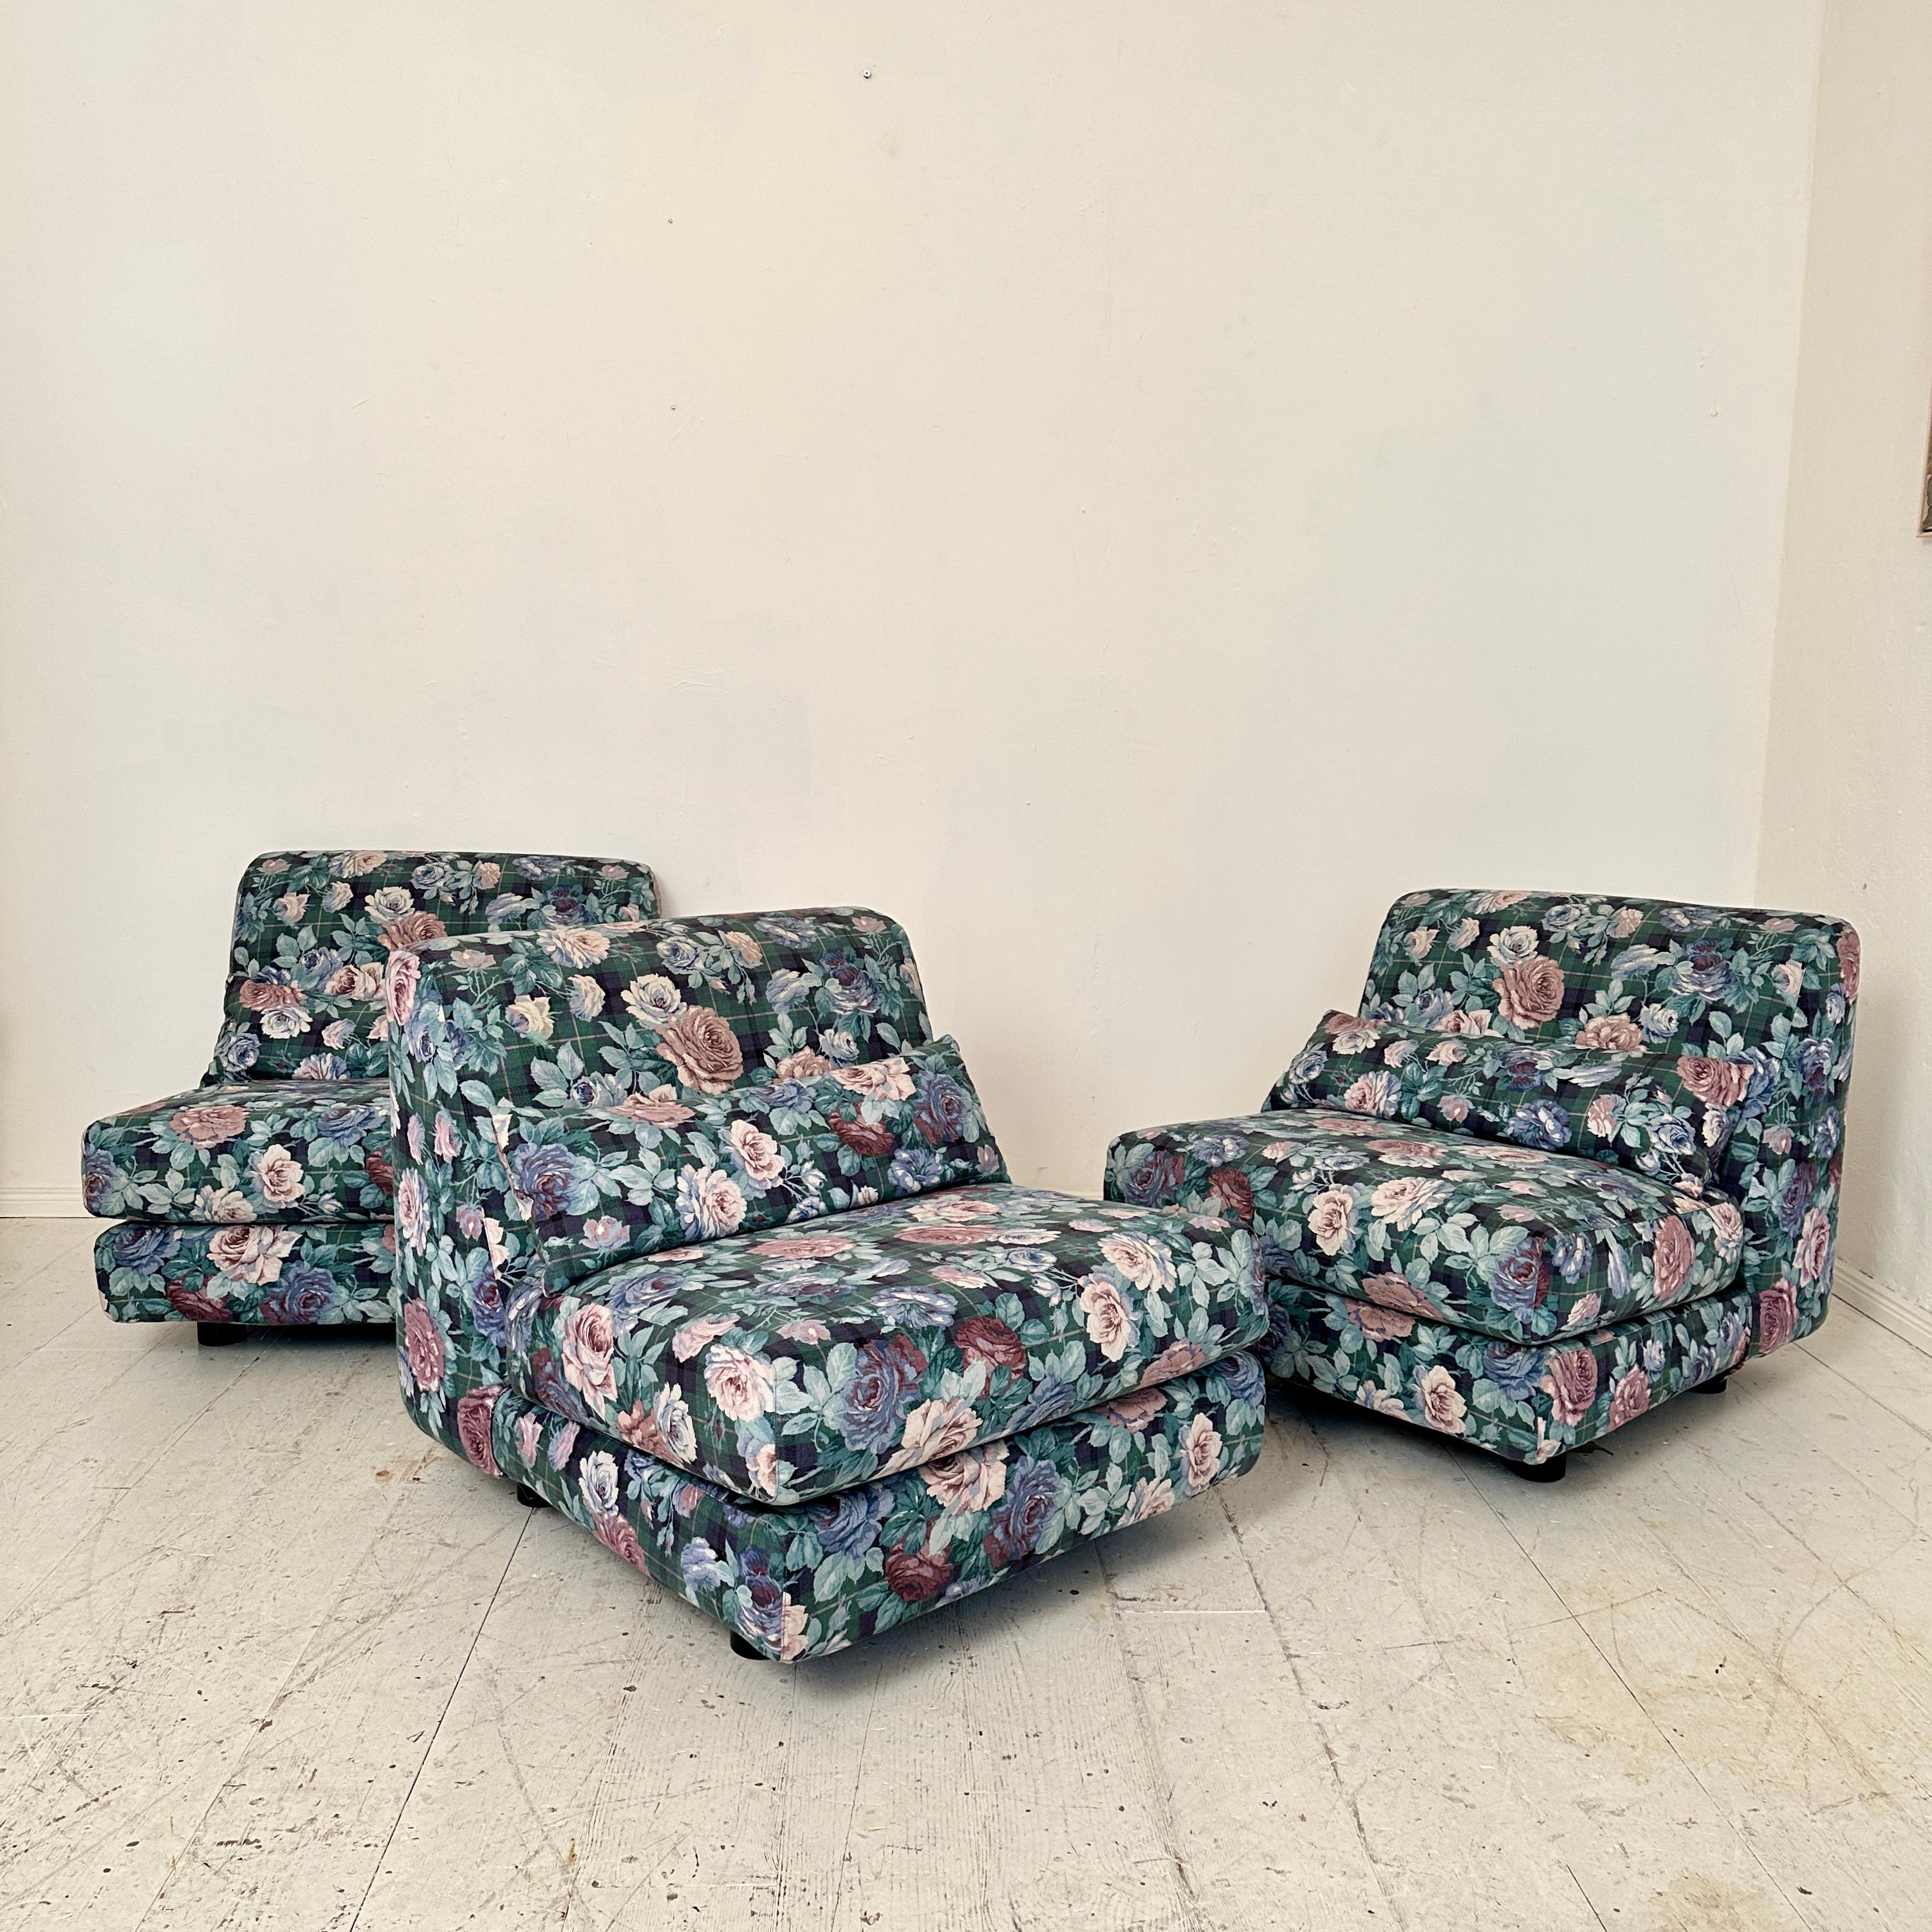 Mid Century Italian Modular Sofa in 3 Pieces with a Flower Fabric, around 1970 For Sale 1